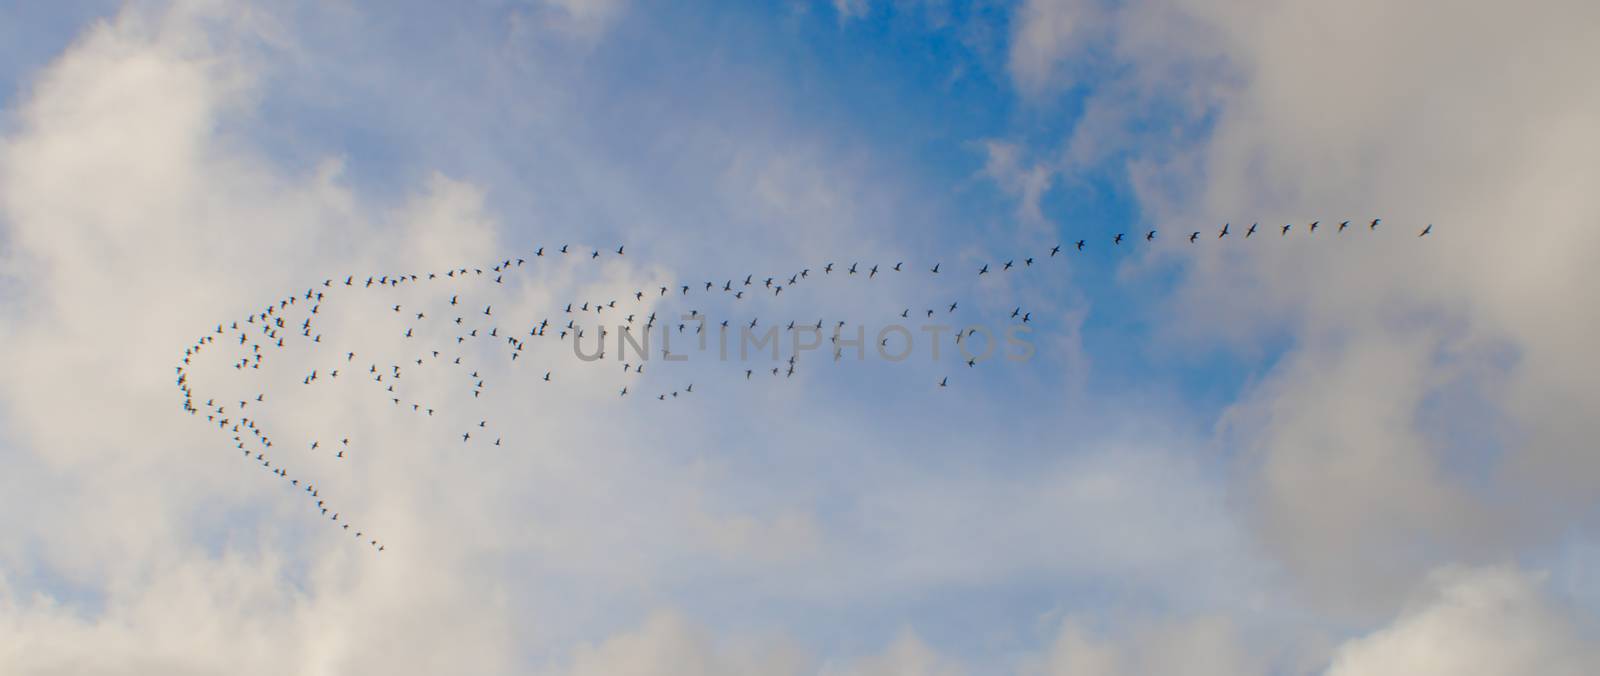 Many birds flying from north to south and back every year. Group of birds it the air creating a triangle shaped pattern.